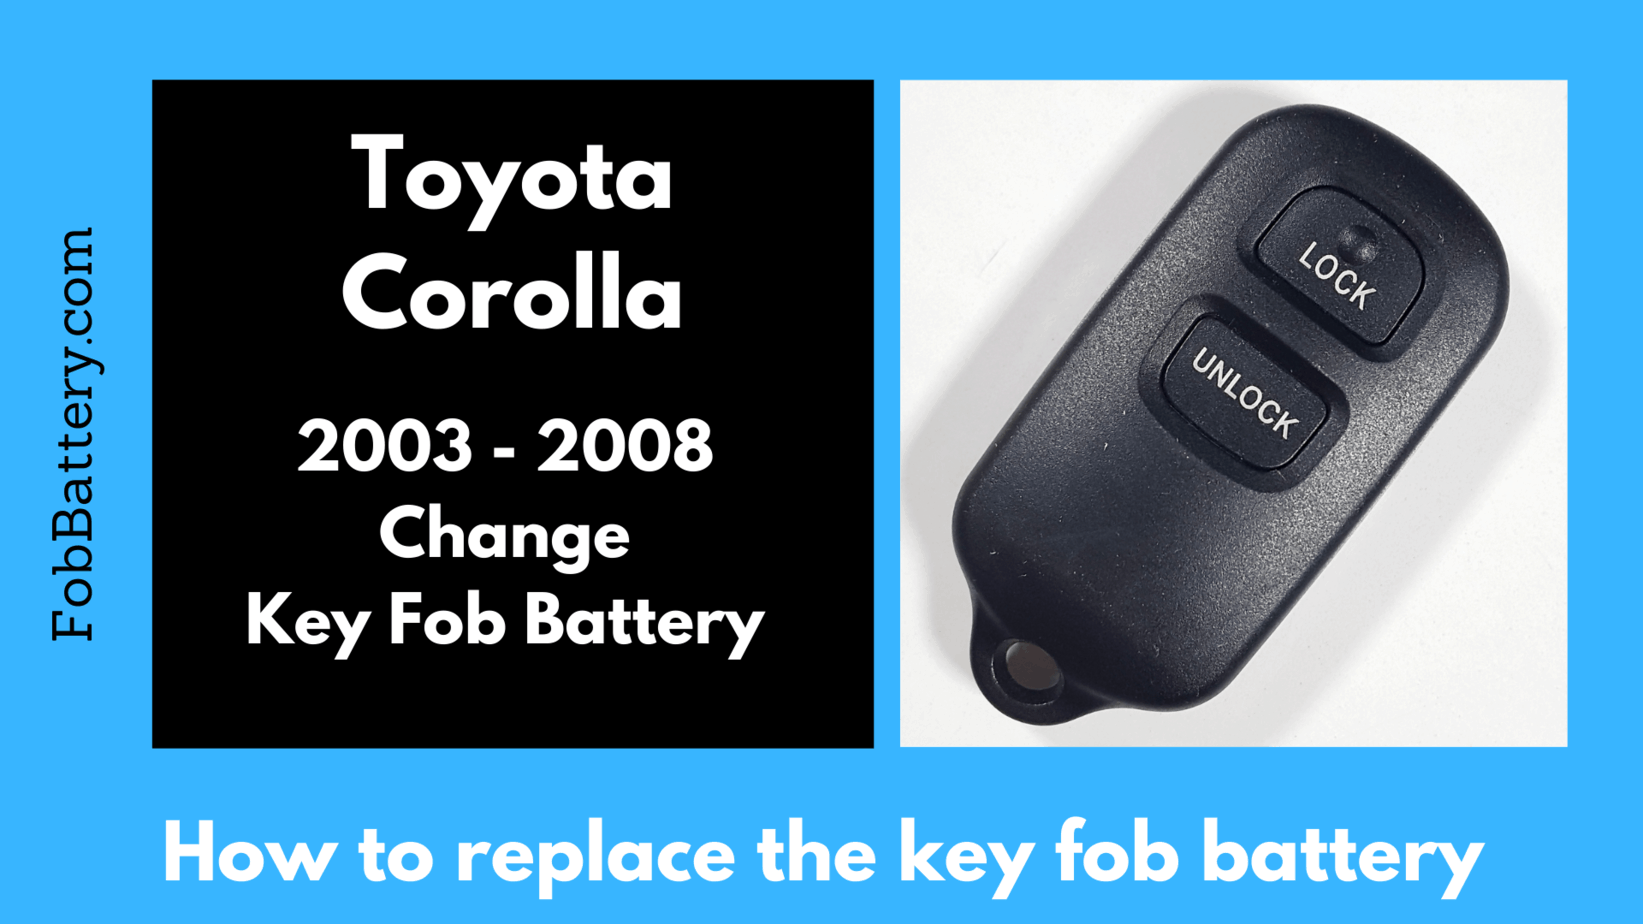 Toyota corolla key fob battery replacement